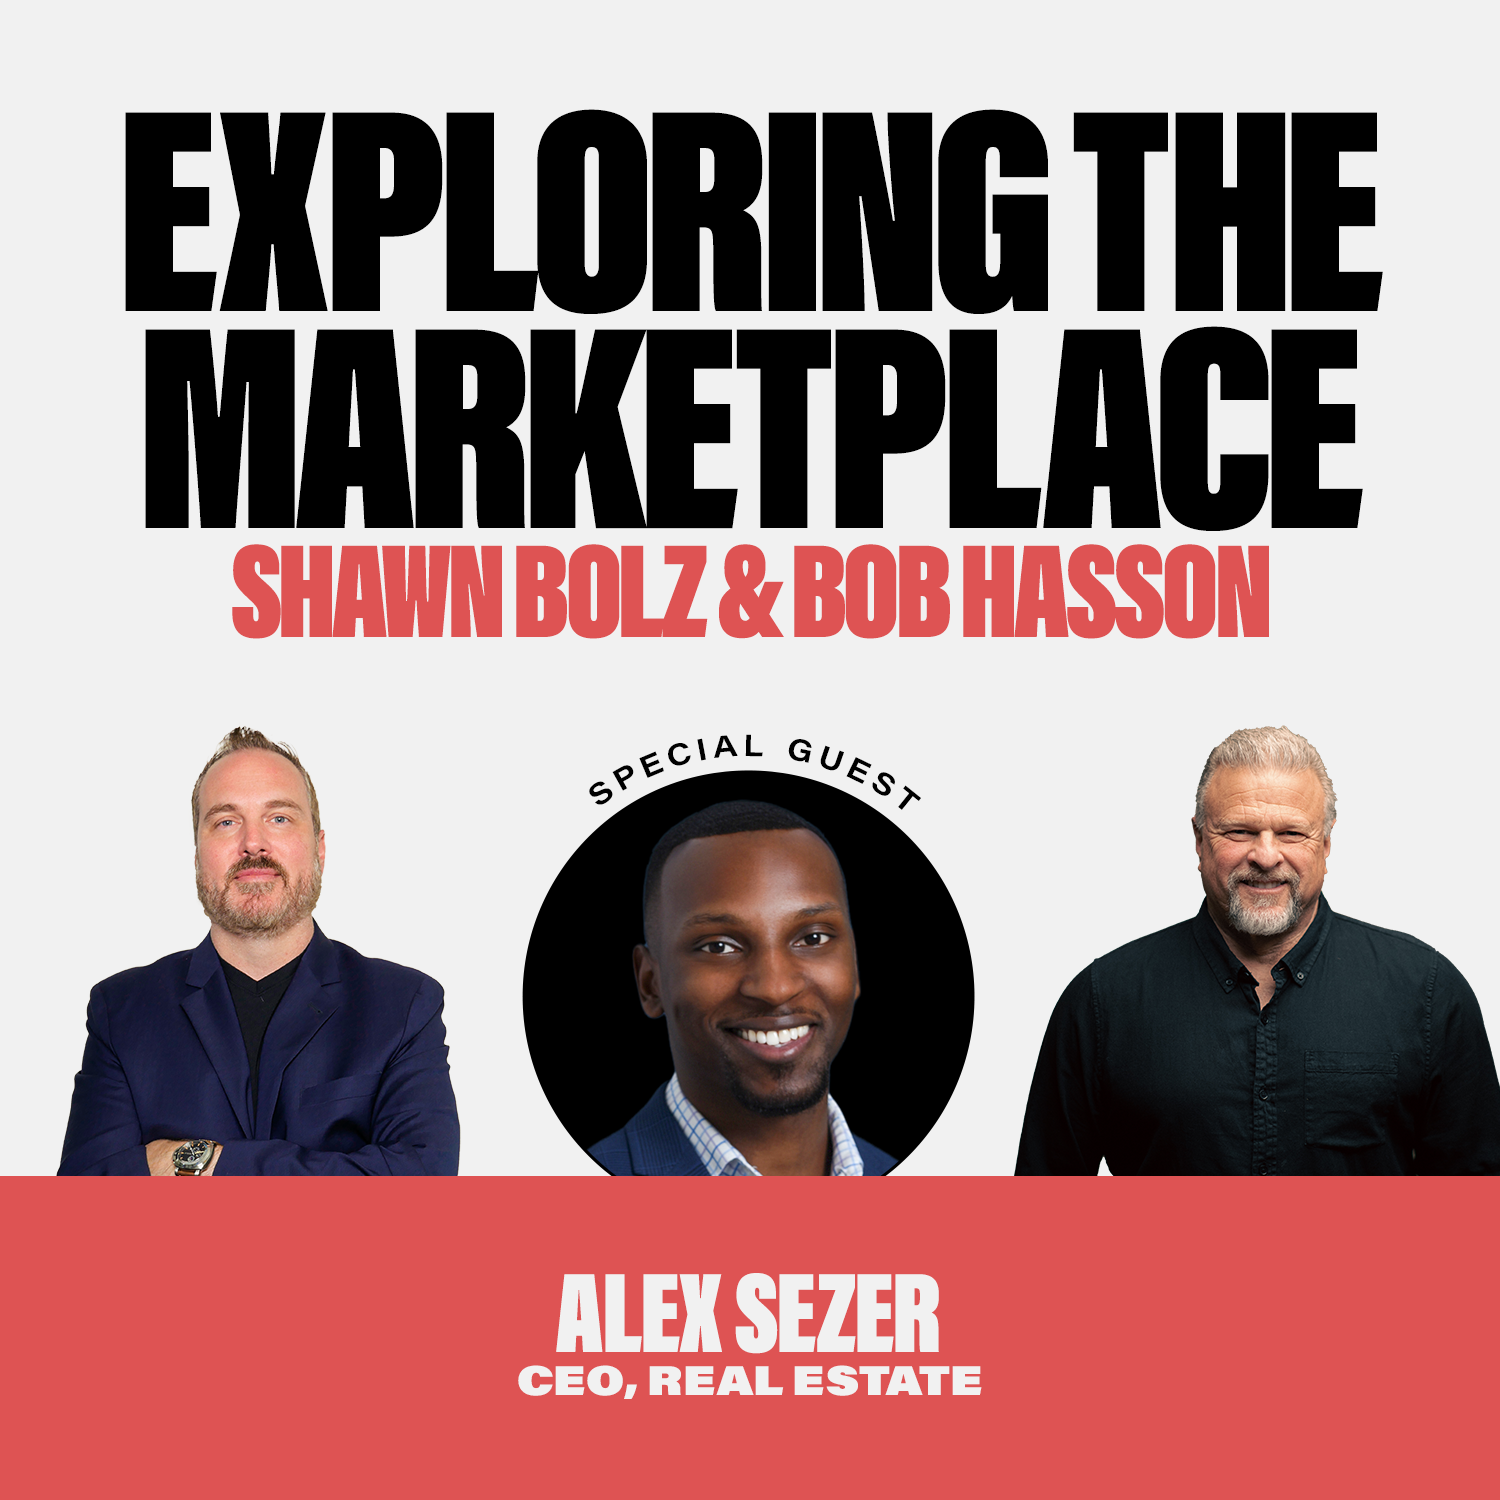 Revolutionizing Business with Biblical Truths with Alex Sezer JR.(S:3 - Ep 42)